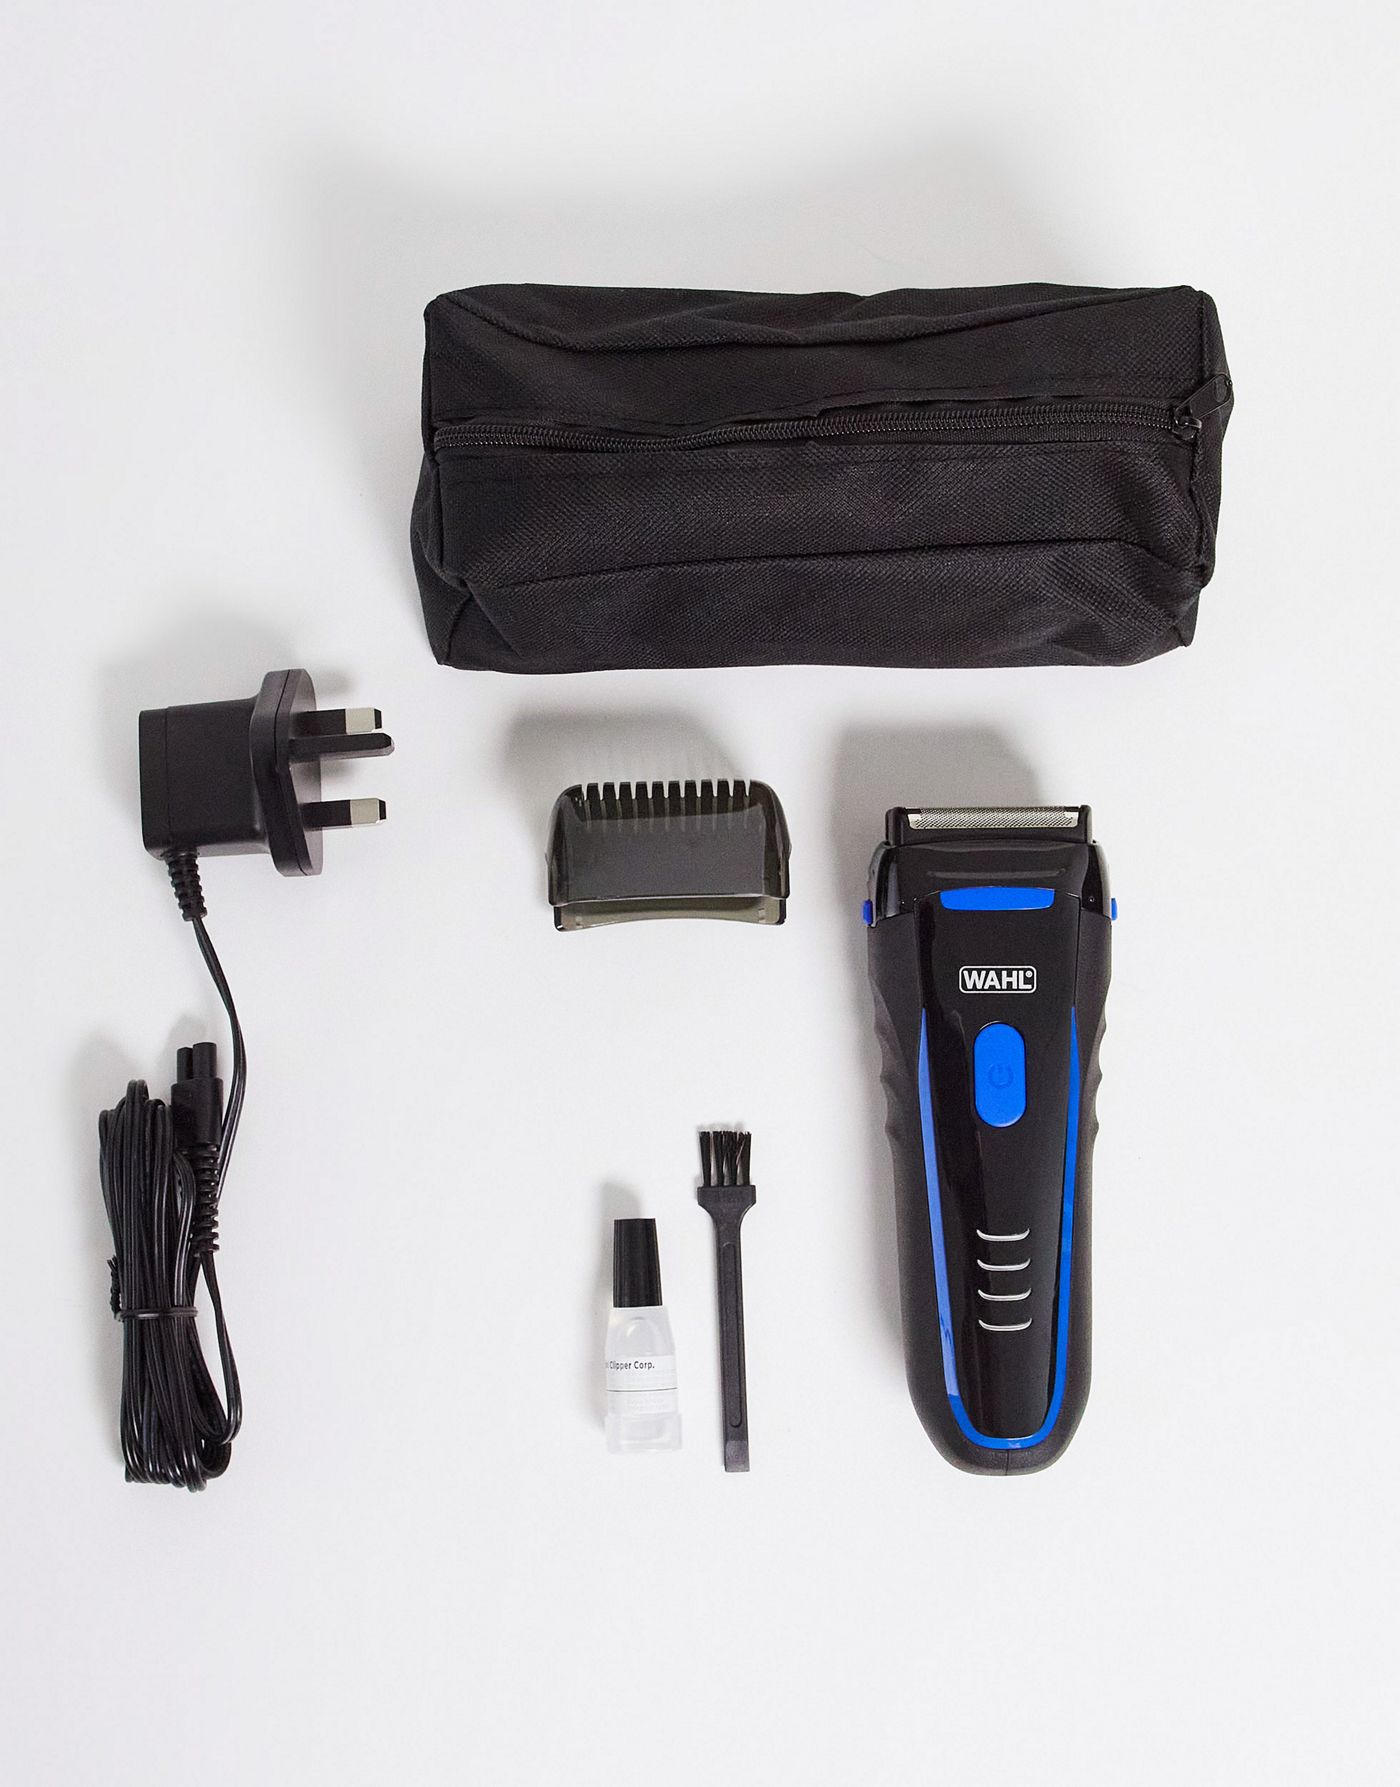 Wahl Clean and Close Plus Lithium Shaver